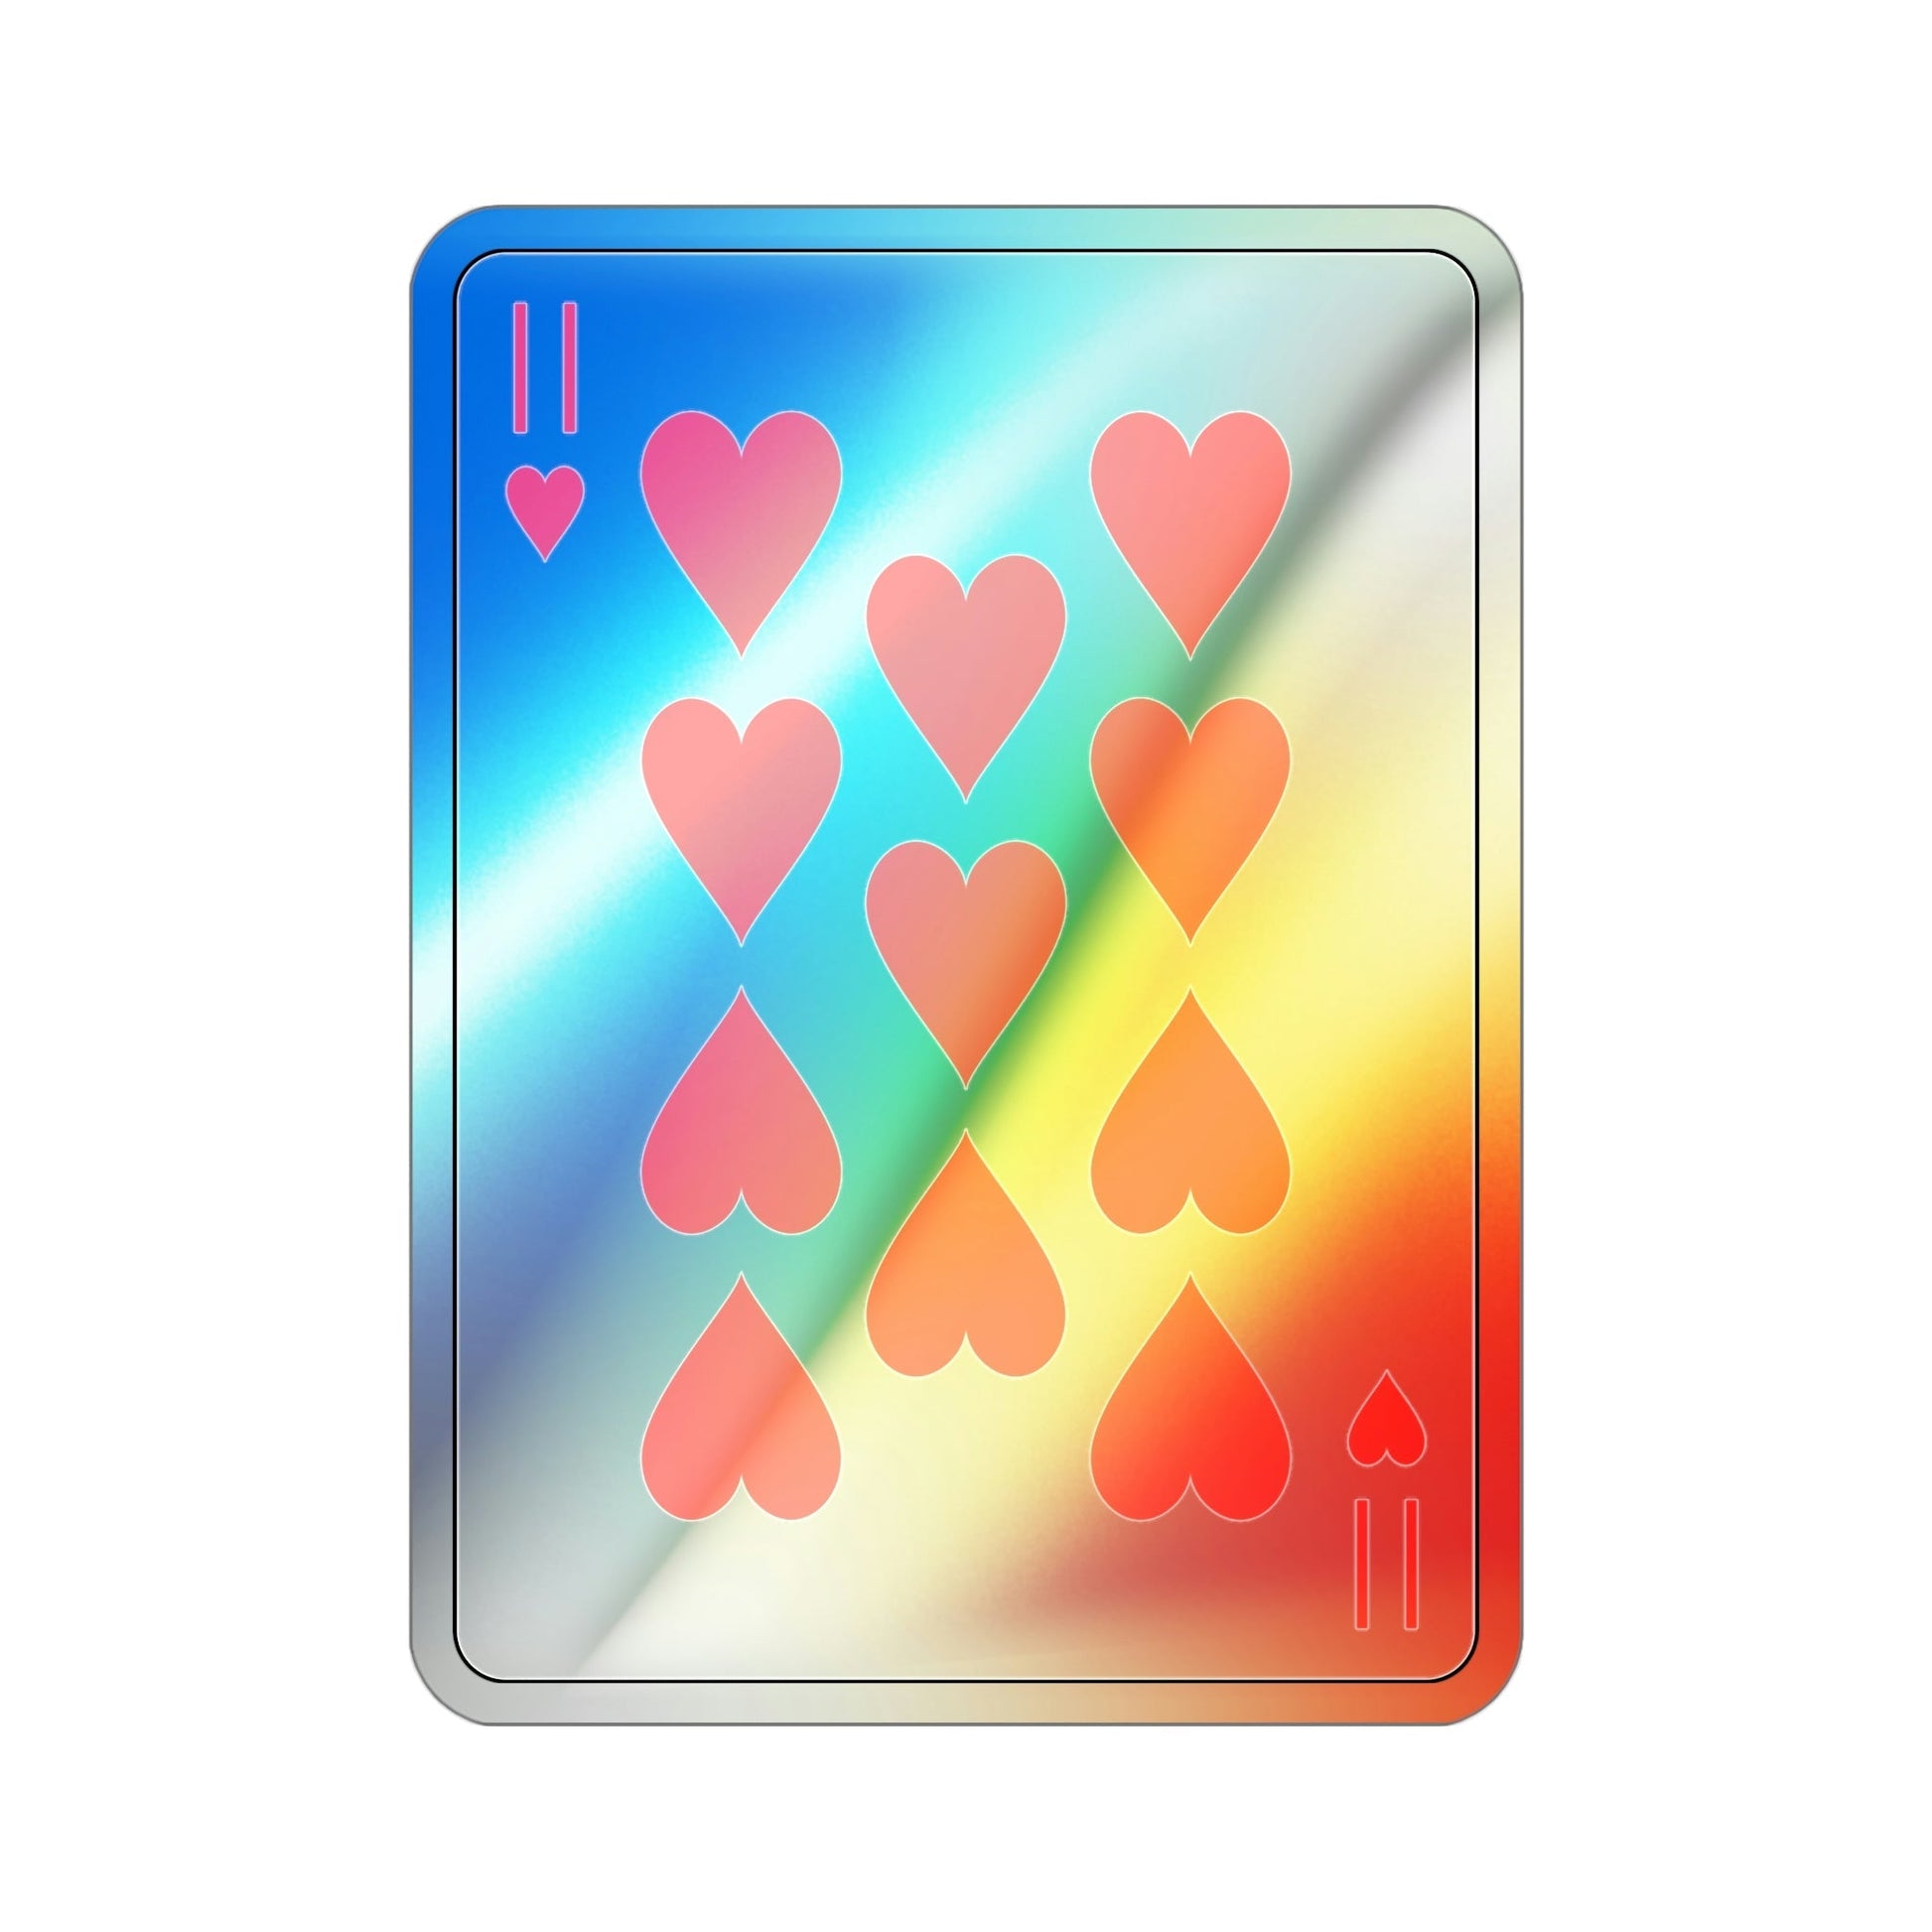 11 of Hearts Playing Card Holographic STICKER Die-Cut Vinyl Decal-4 Inch-The Sticker Space